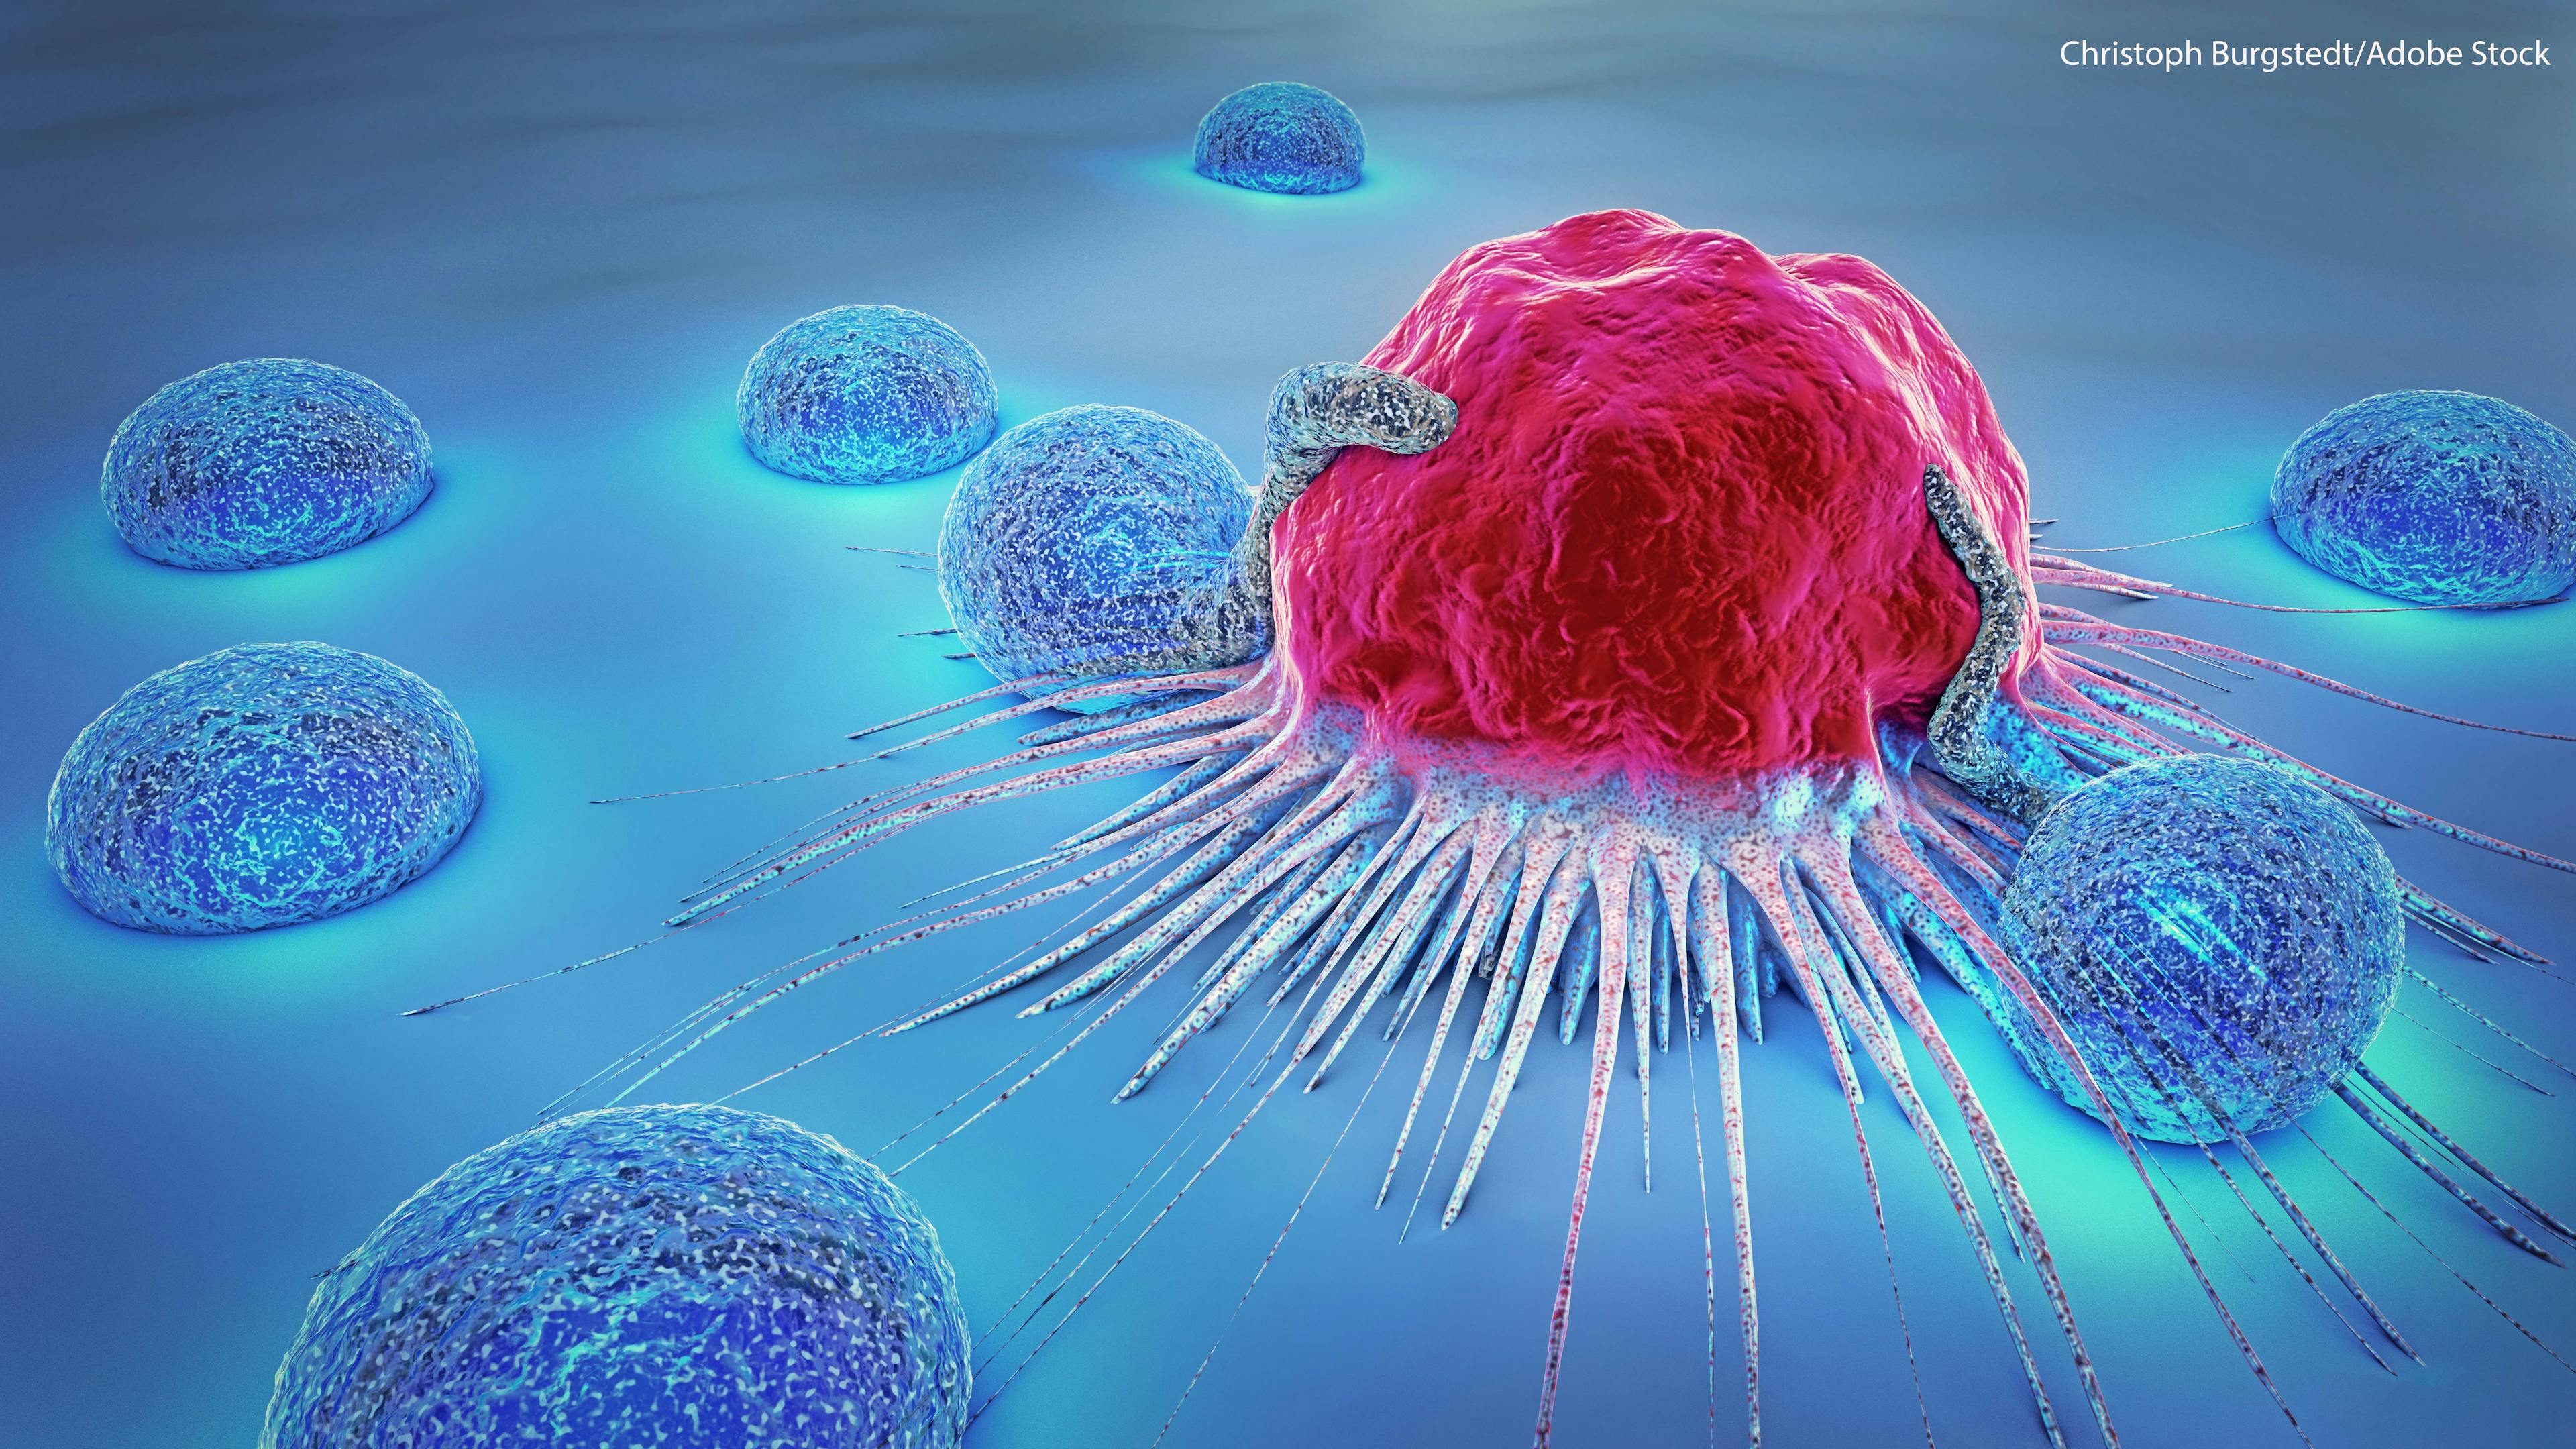 Can Tumor Infiltrating Lymphocytes Predict Outcomes in Head & Neck Cancer?